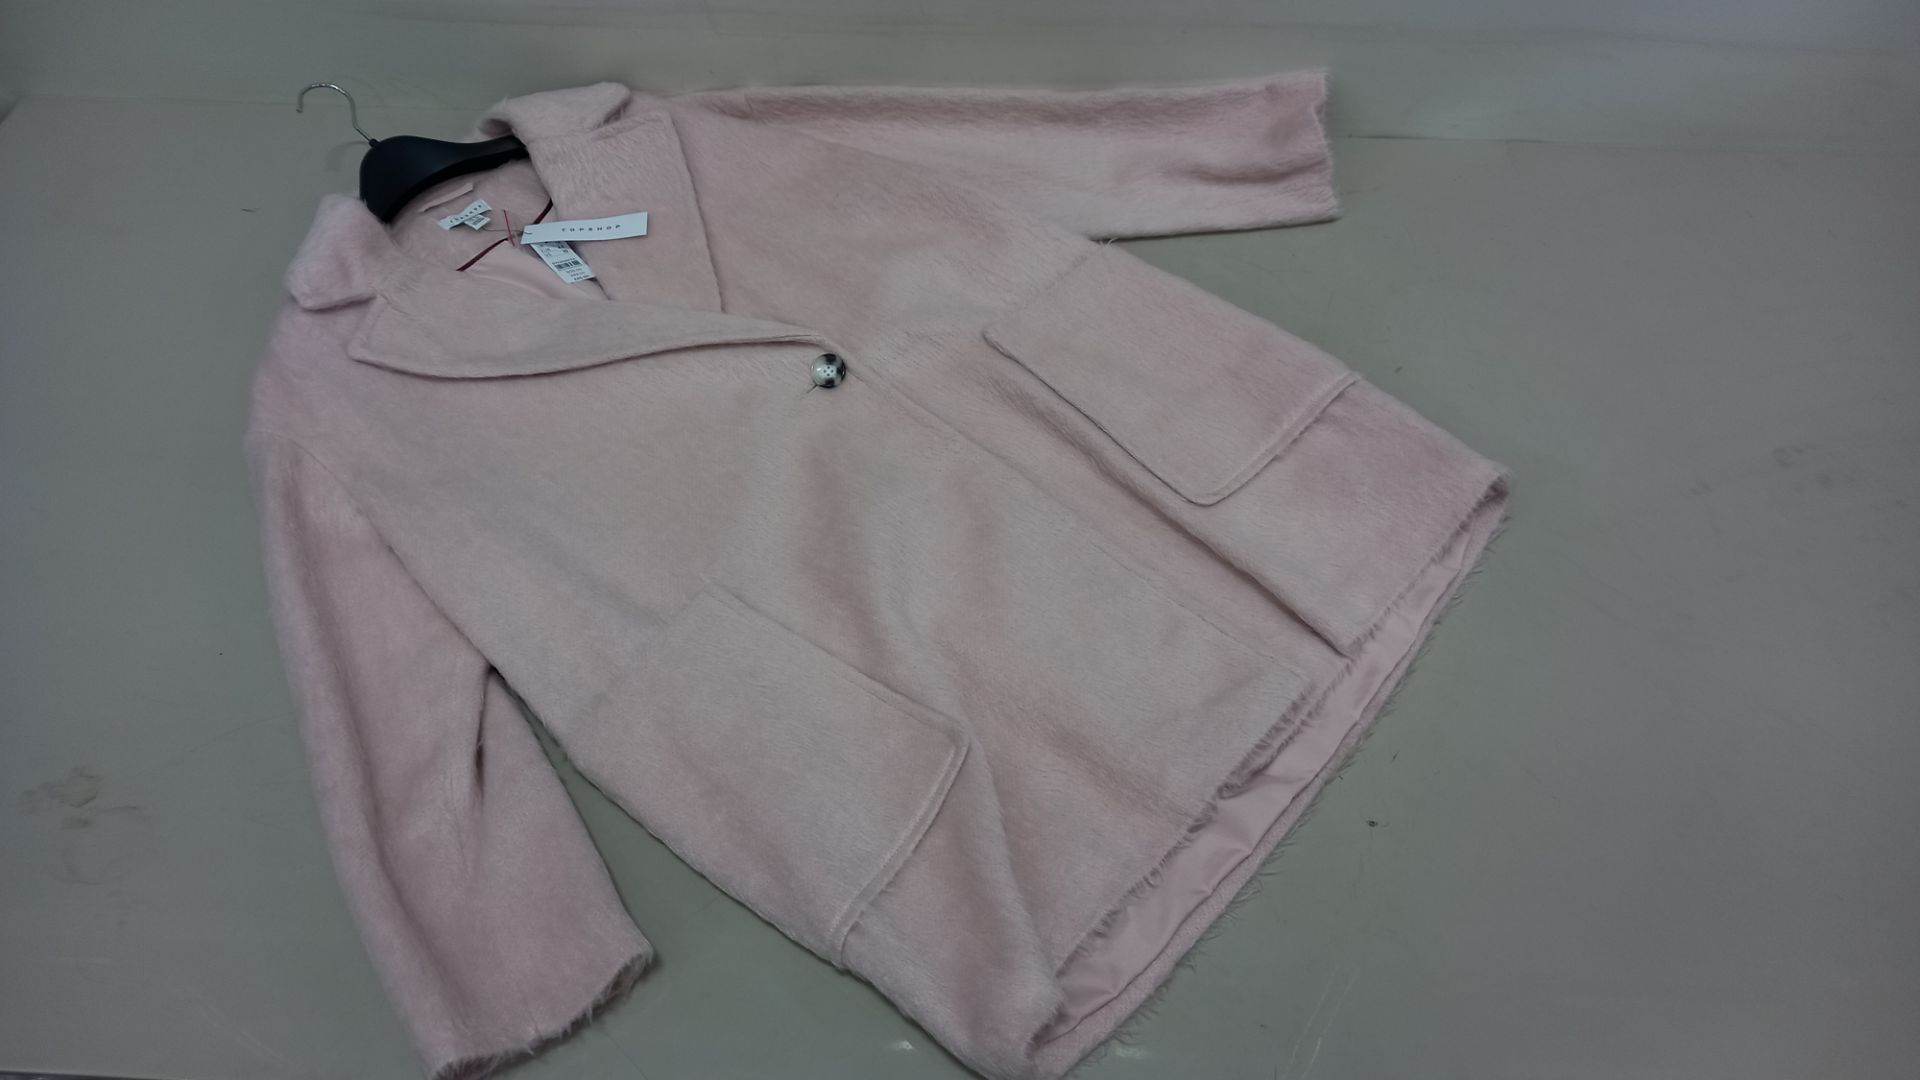 5 X BRAND NEW TOPSHOP PINK FUR BUTTONED COATS / JACKETS SIZE 14 RRP £65.00 (TOTAL RRP £325.00)